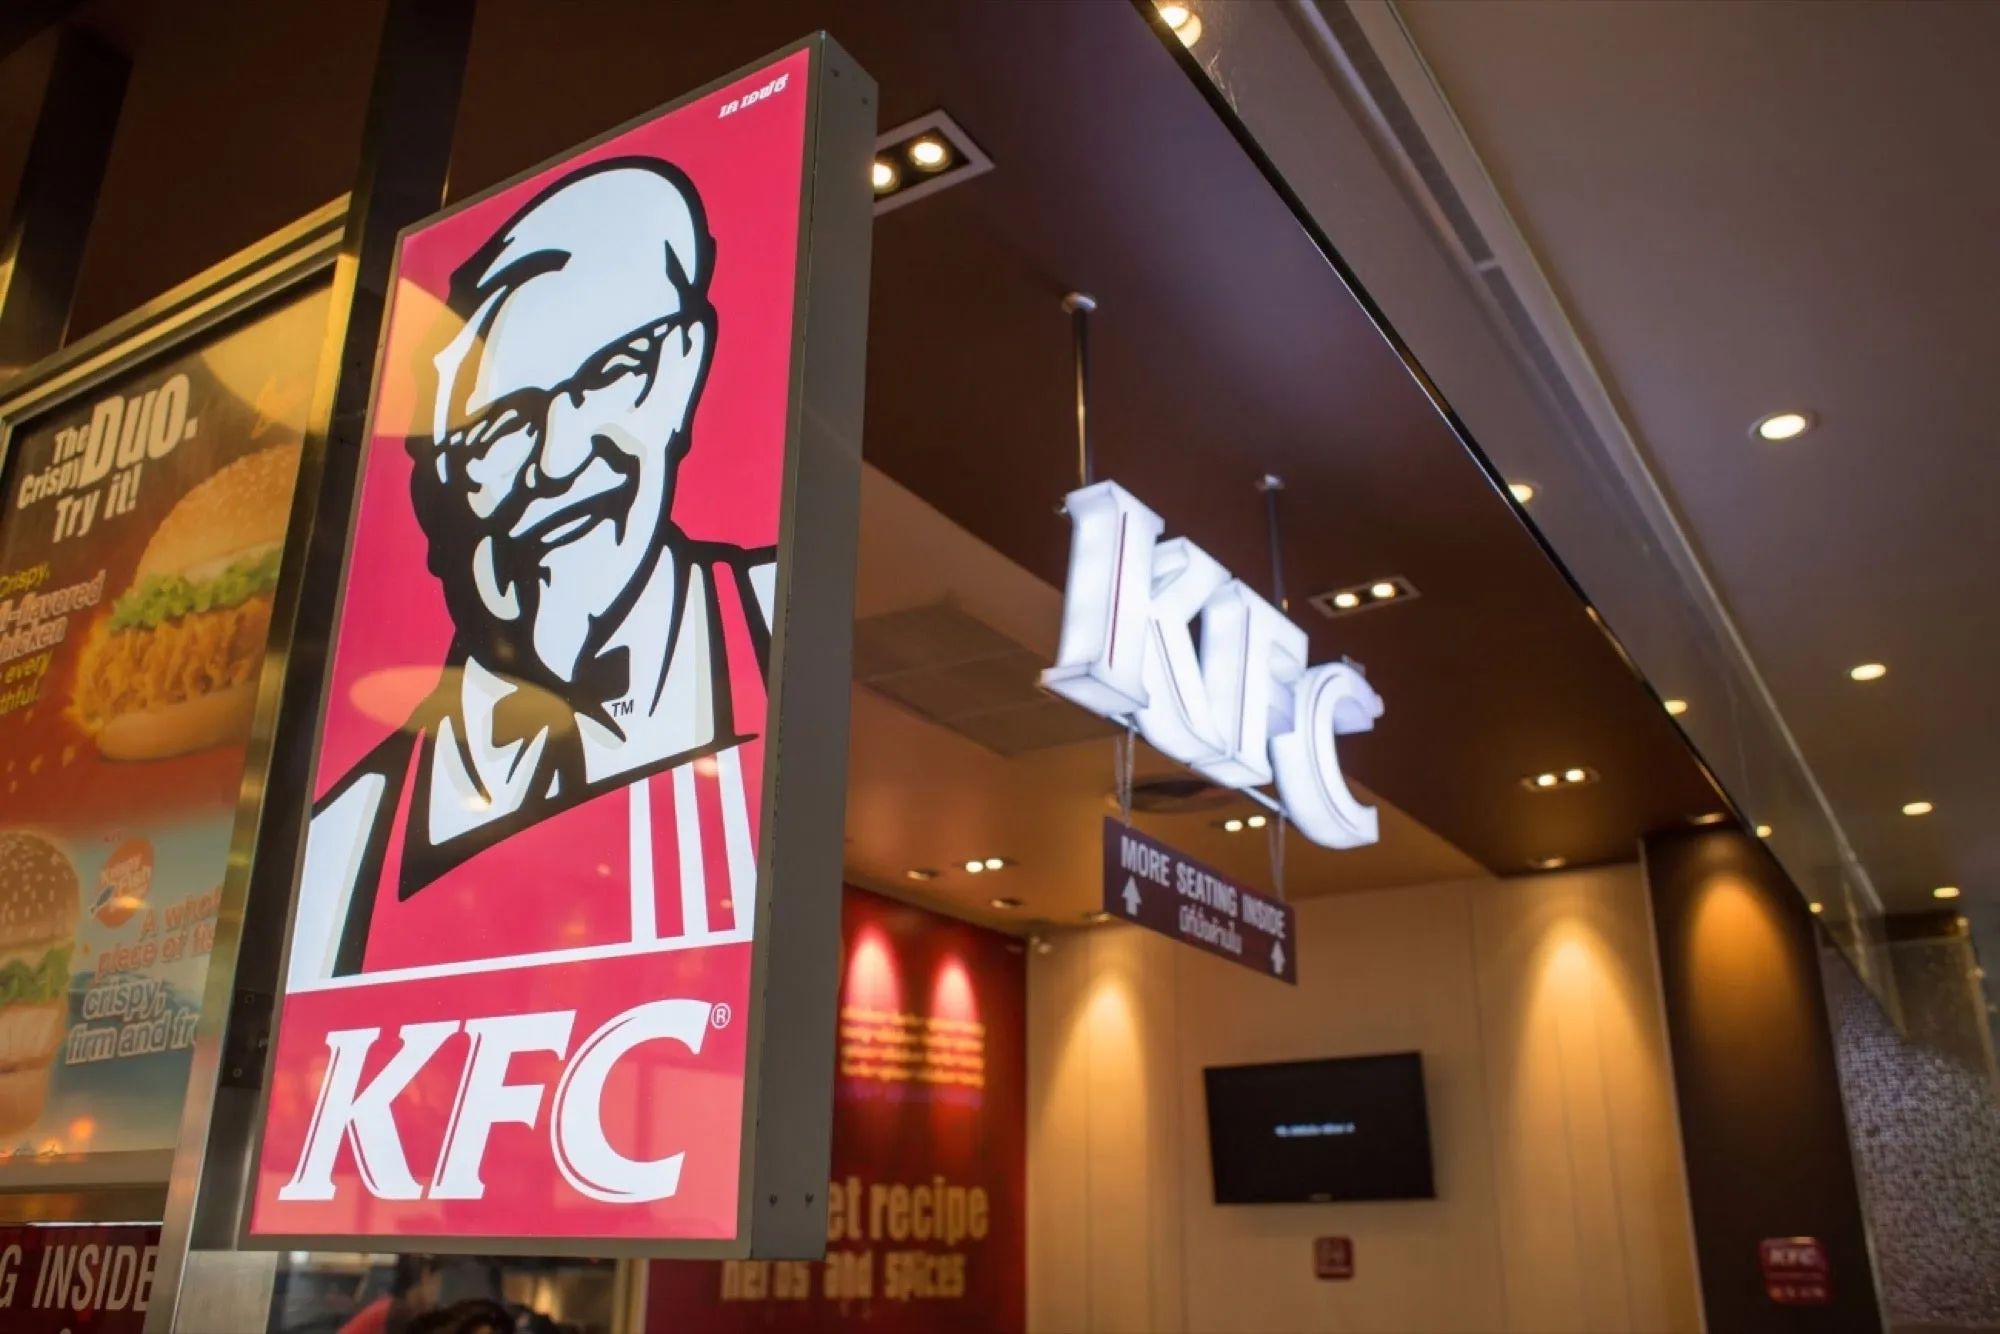 How to Find KFC Hours Online